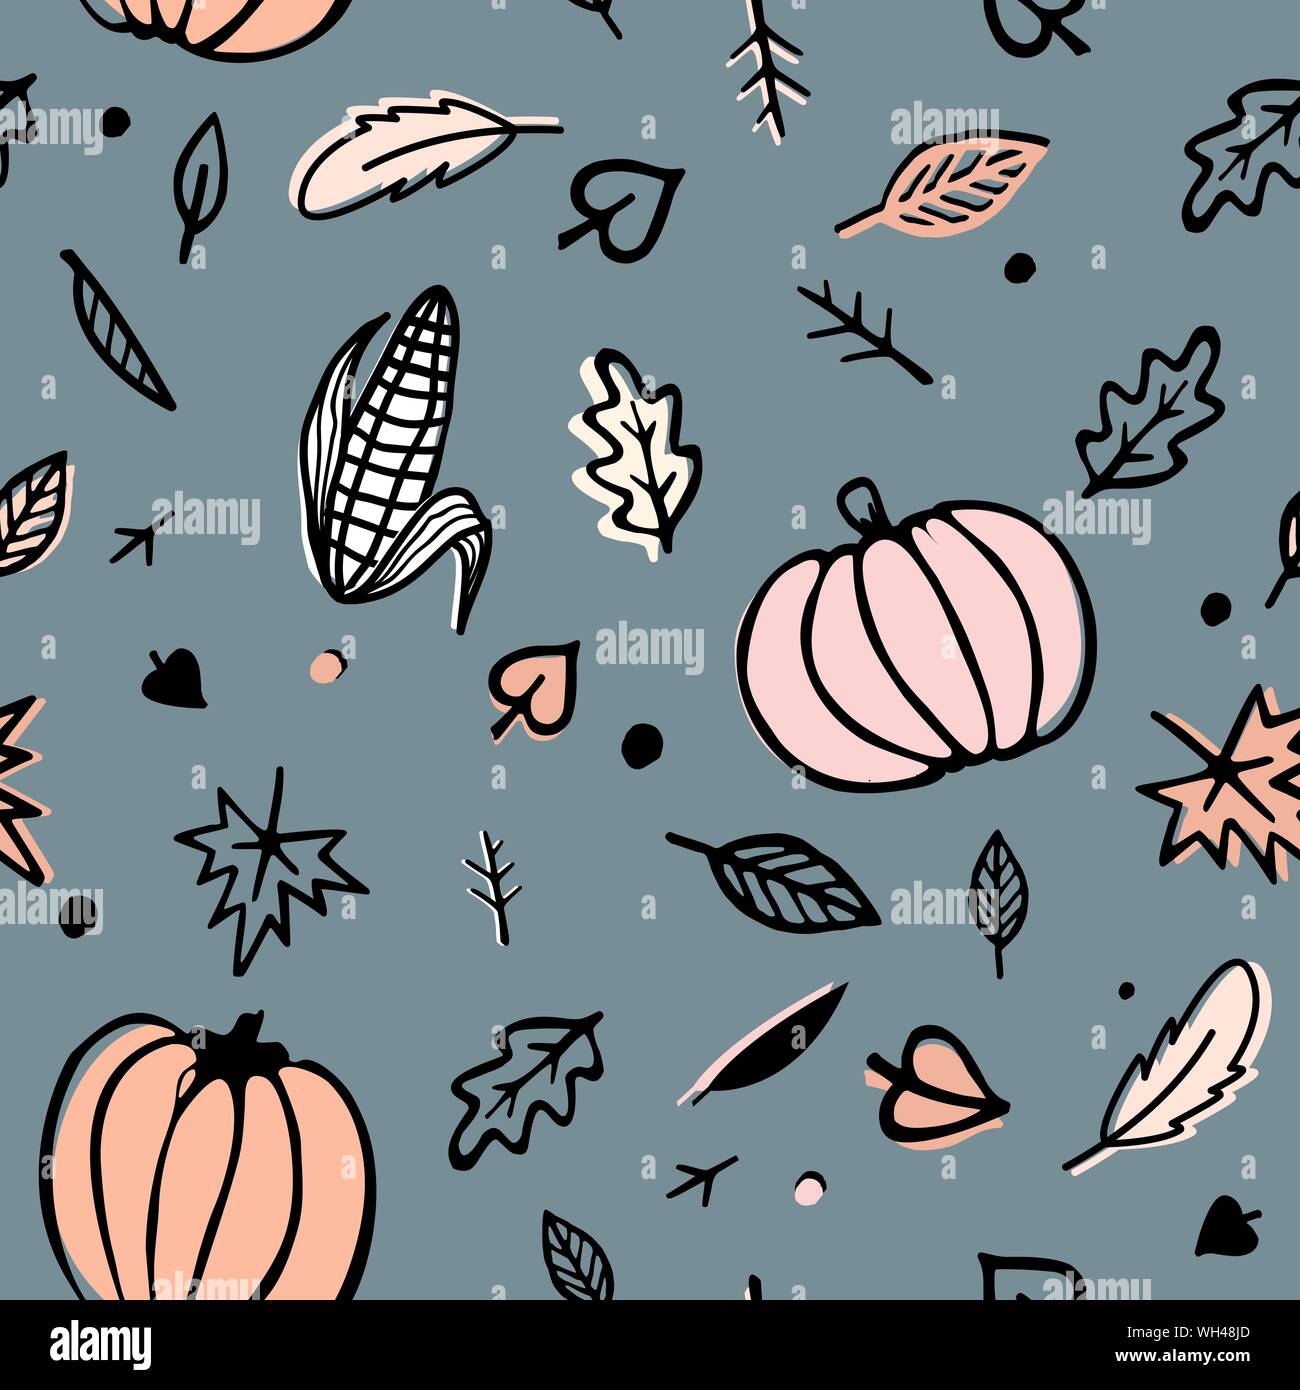 Thanksgiving day seamless pattern with corn cobs, pumpkins, and autumn leaves. Doodle vector ornament isolated on grey background Stock Vector